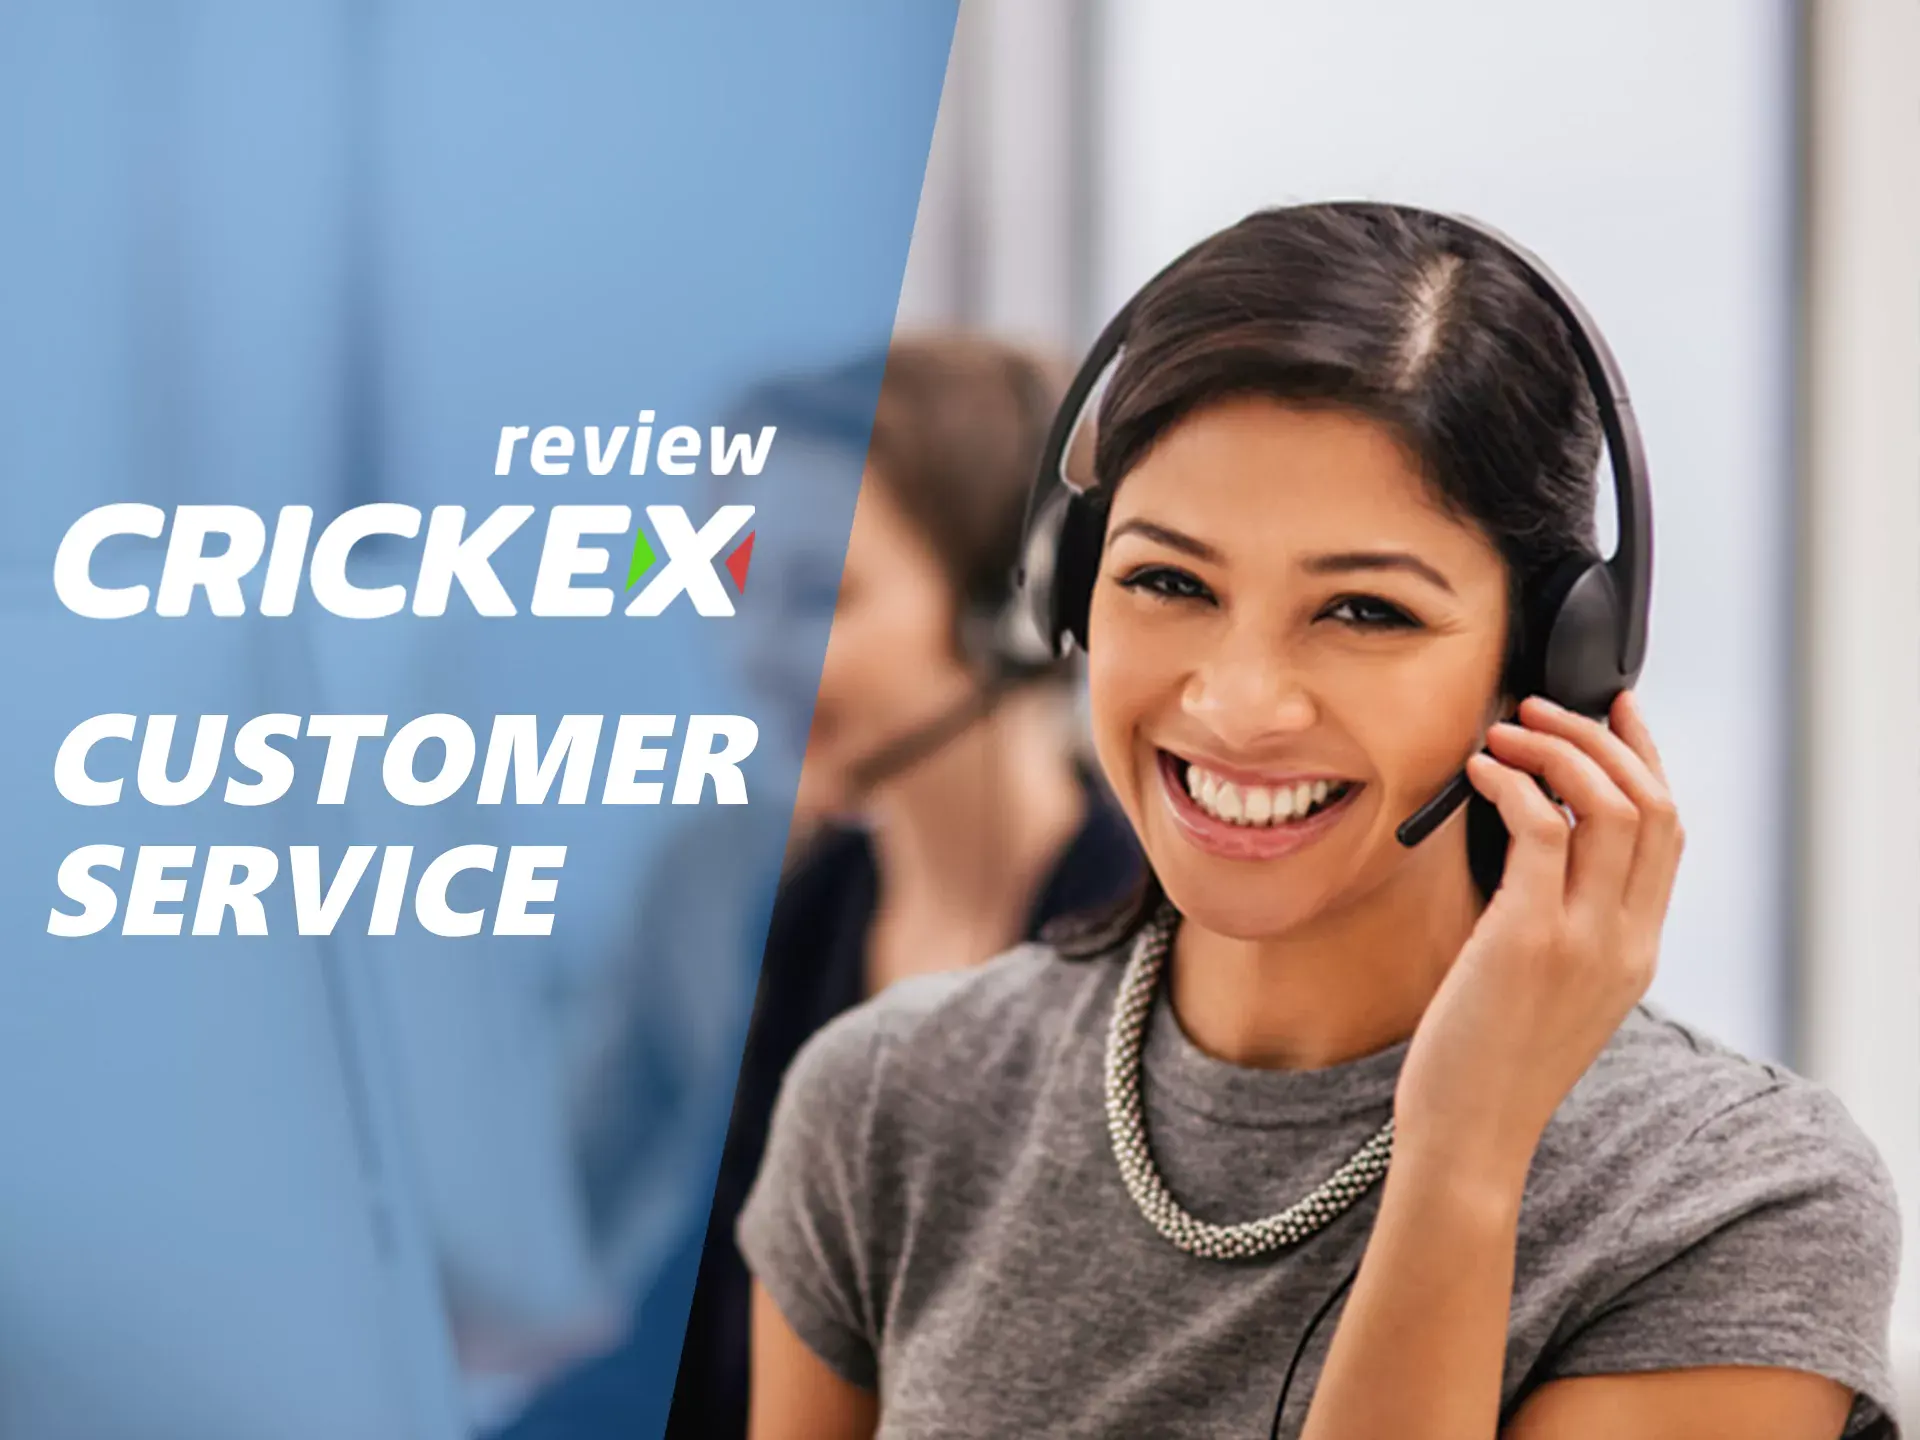 Ask your questions to customer service.